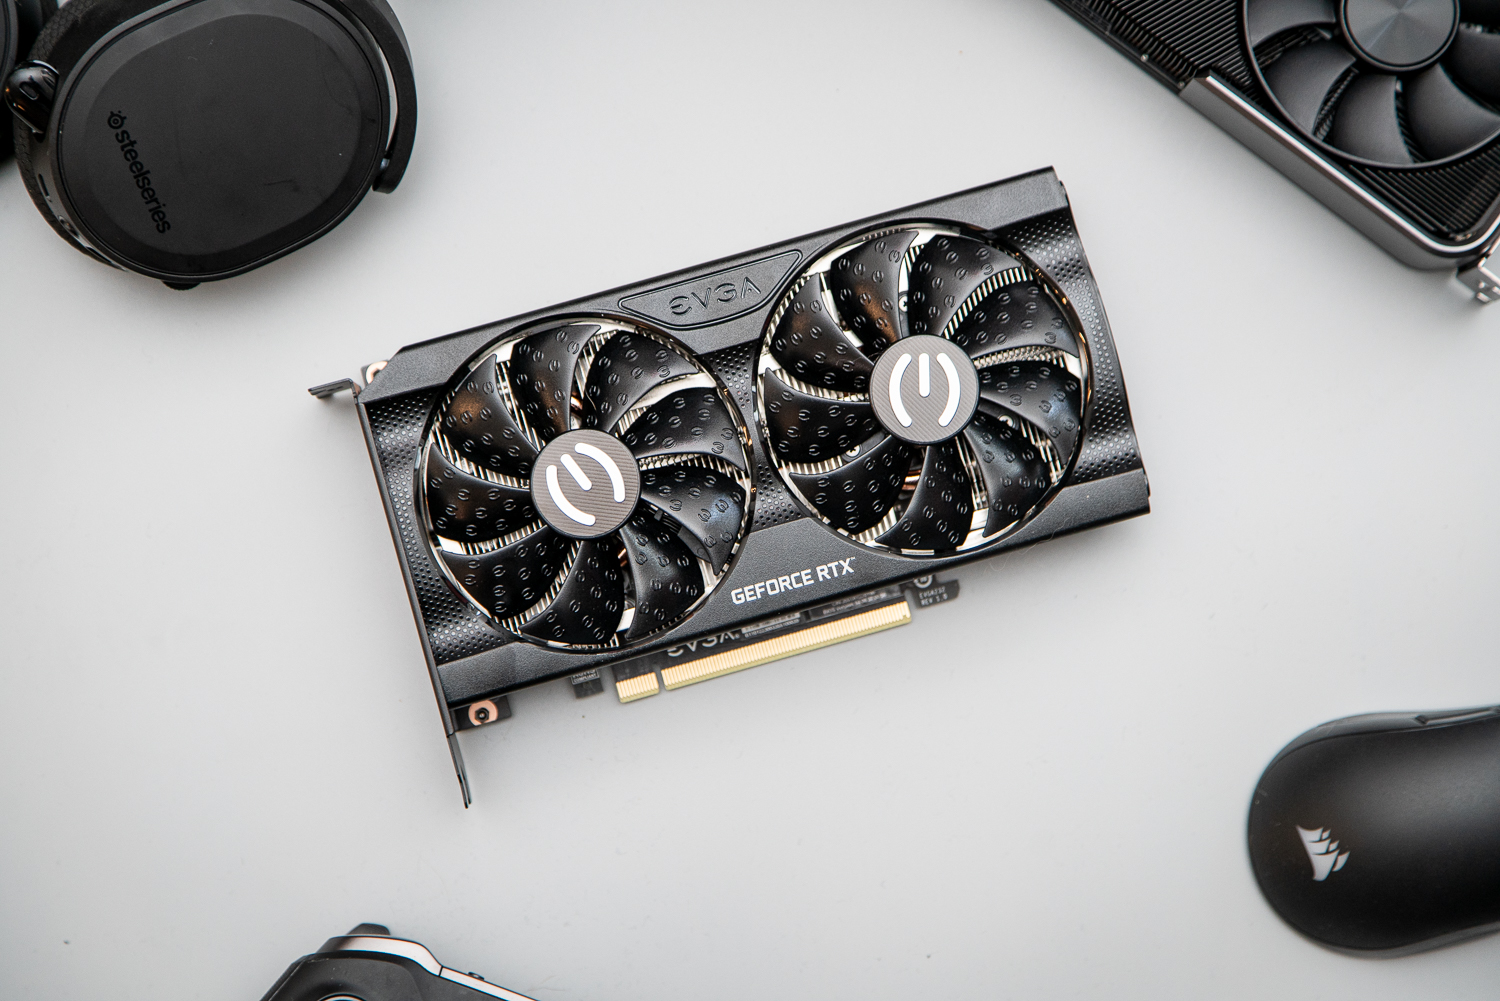 Nvidia RTX 2080 Super review: Squeezing out a few extra frames